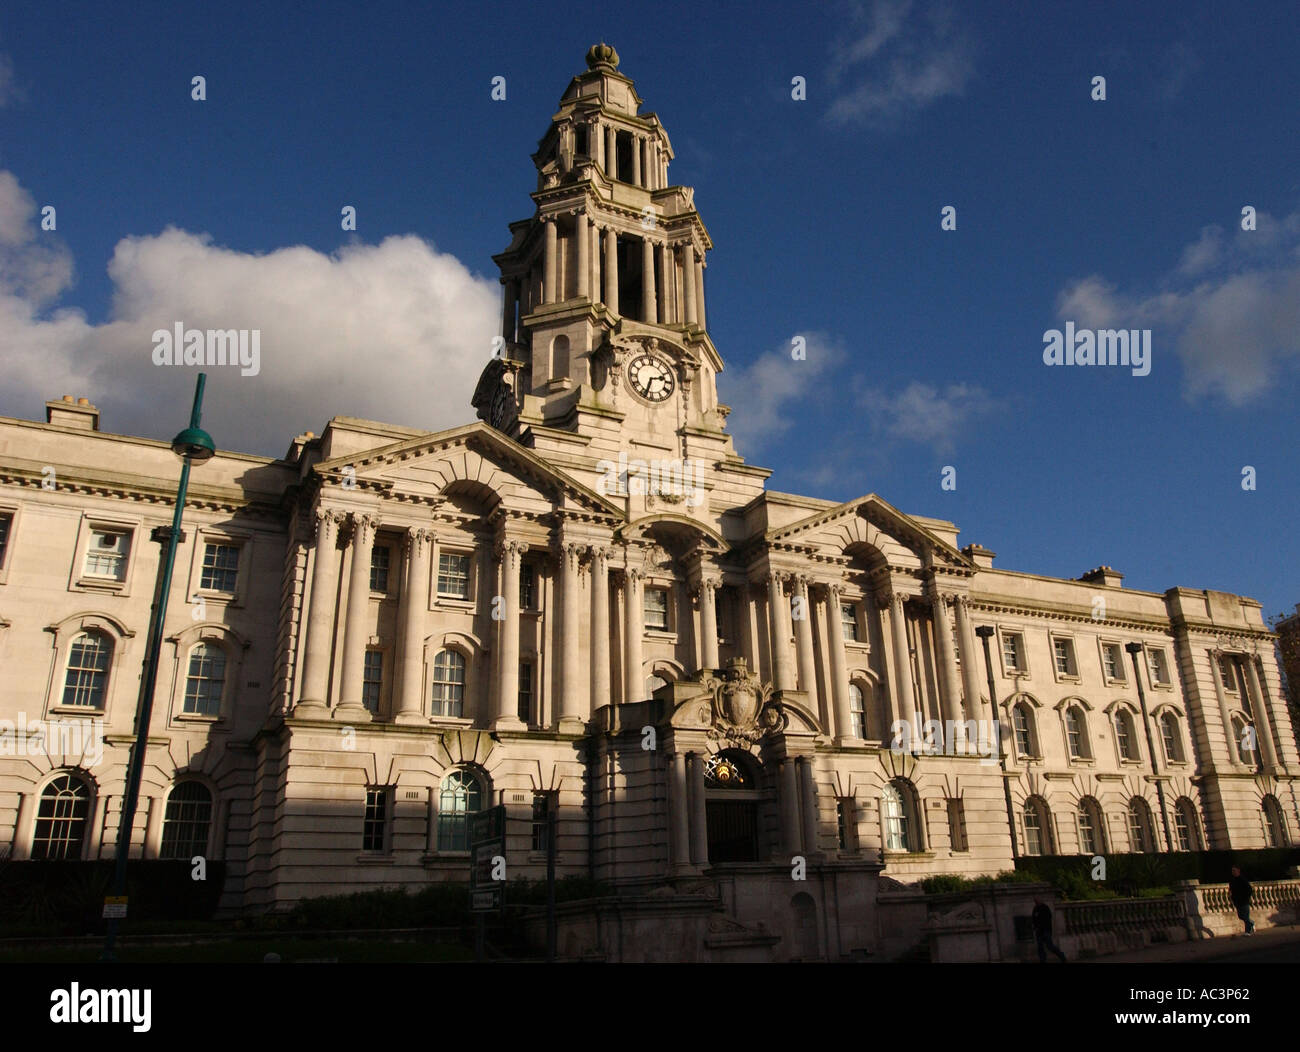 PHOTOGRAPH BY HOWARD BARLOW STOCKPORT TOWN HALL Stock Photo